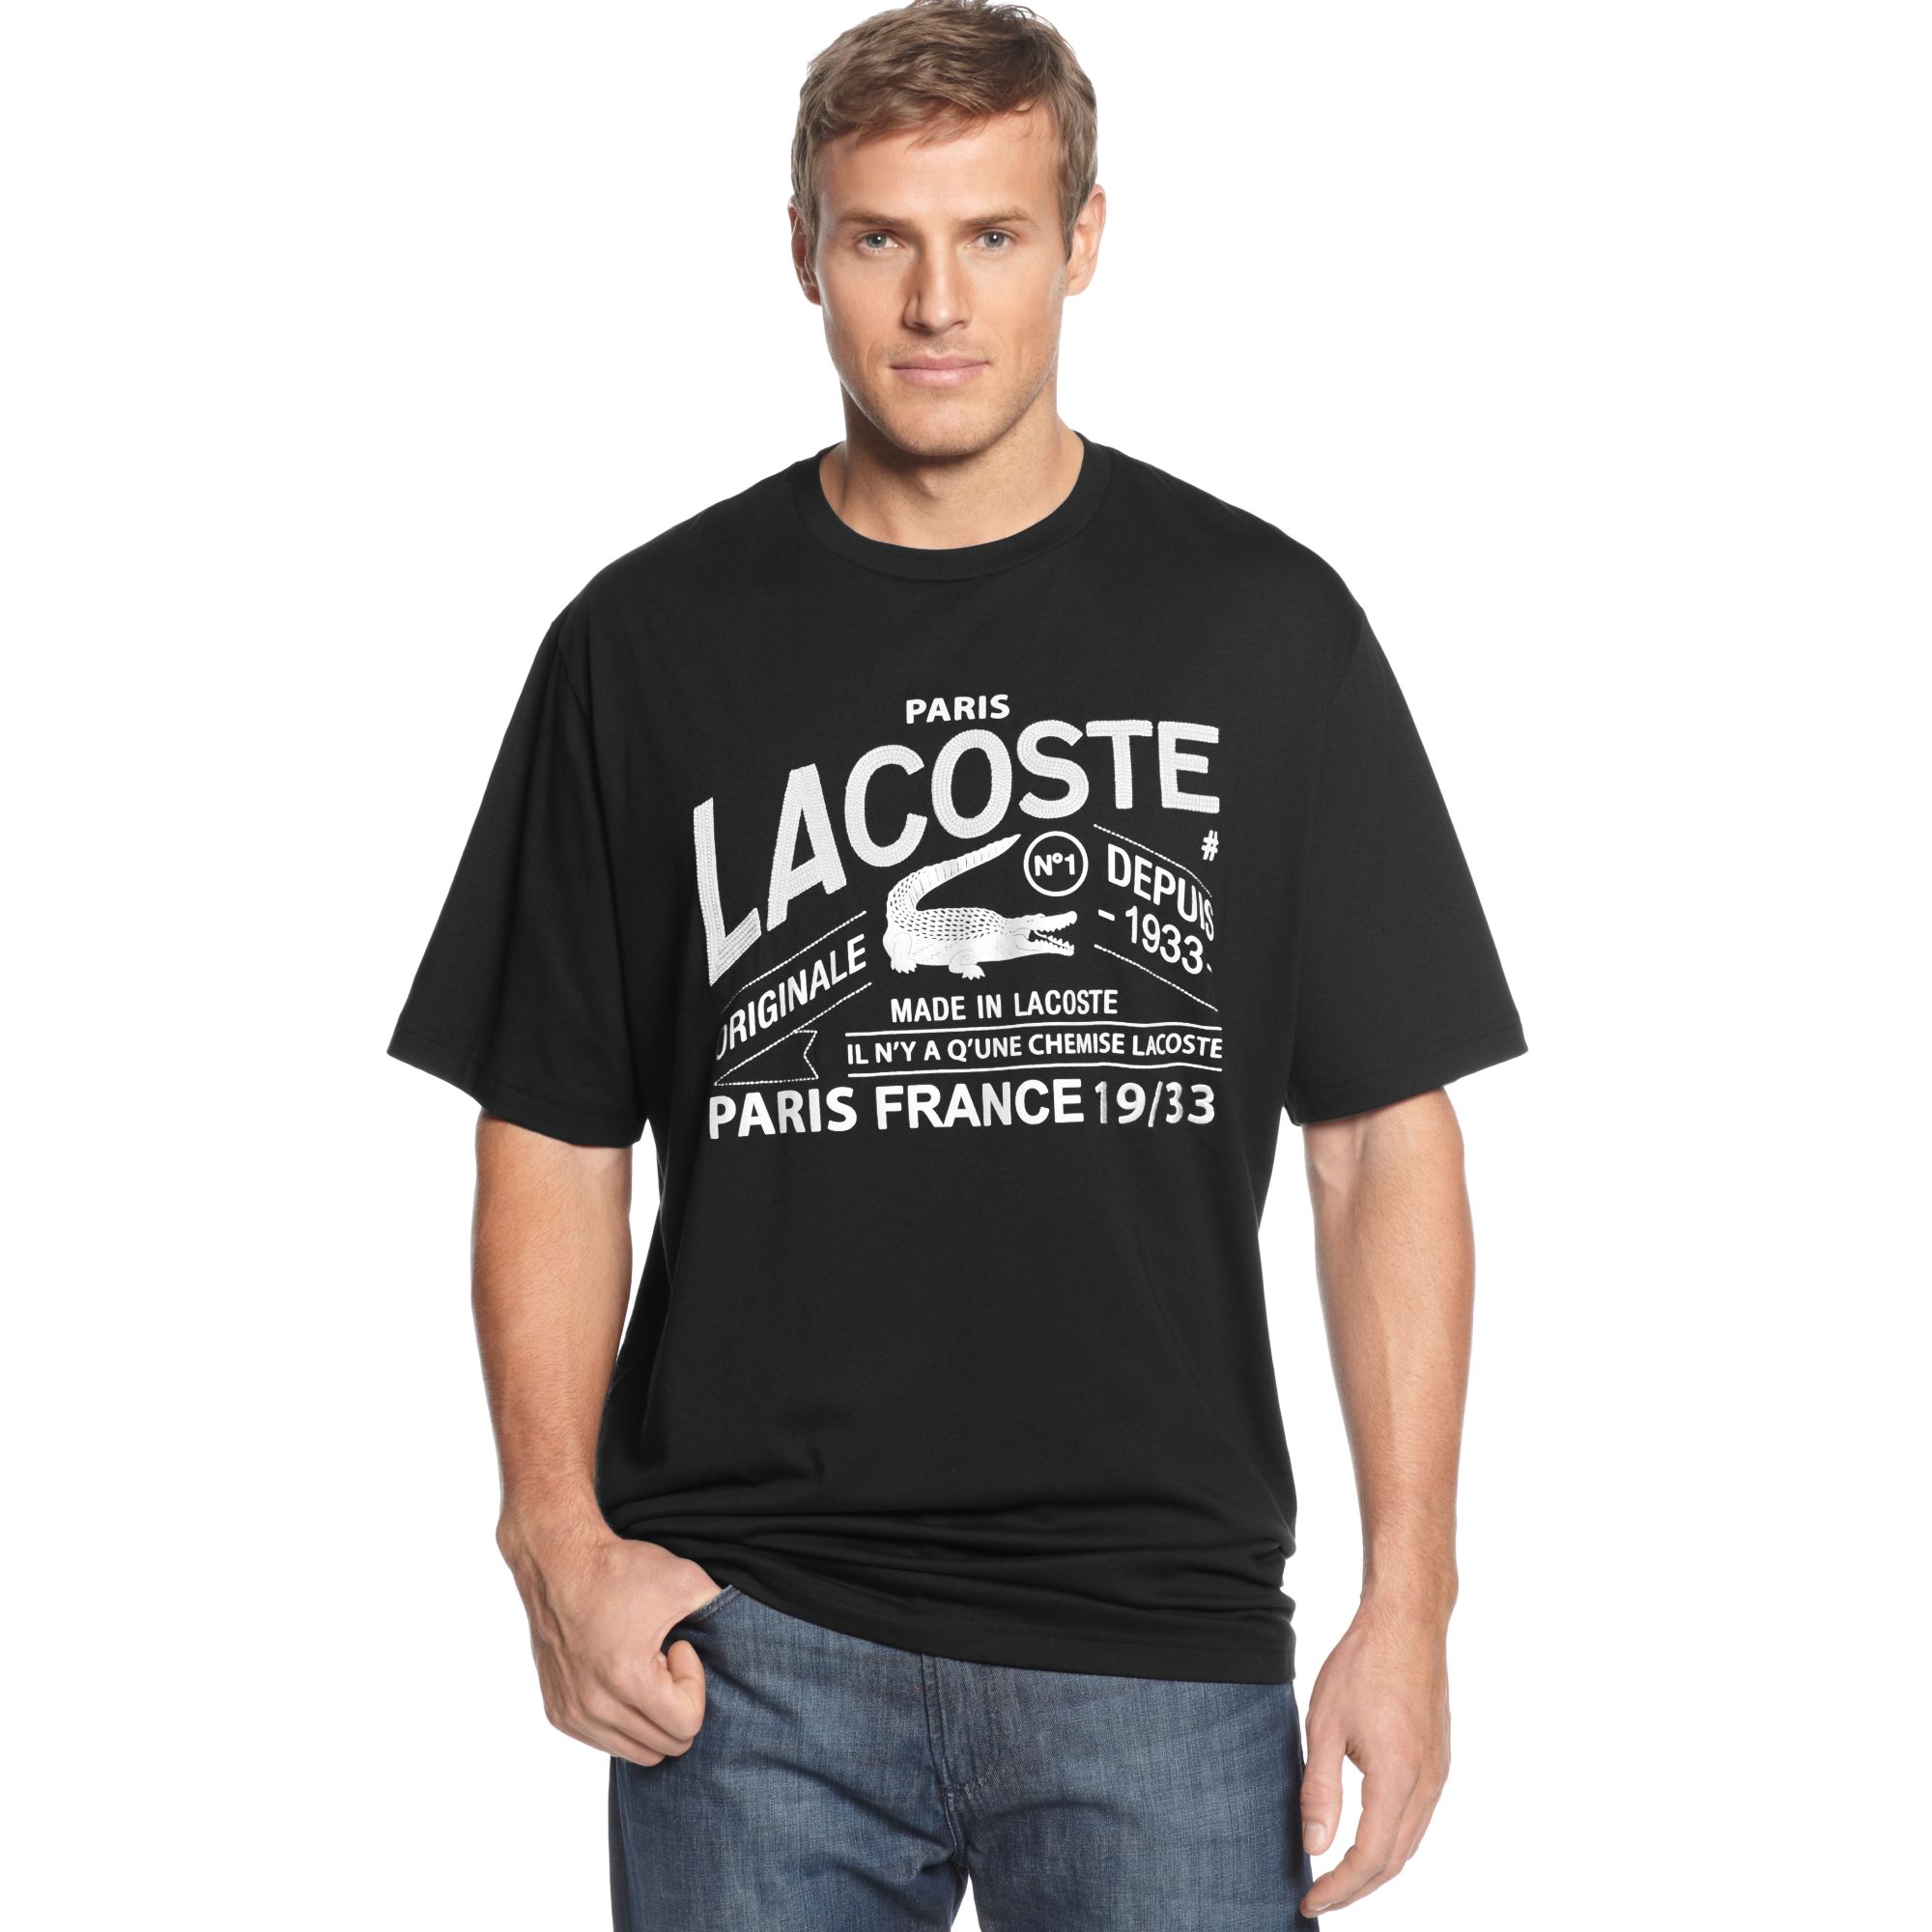 Lyst - Lacoste Big and Tall Graphic T-shirt in Black for Men